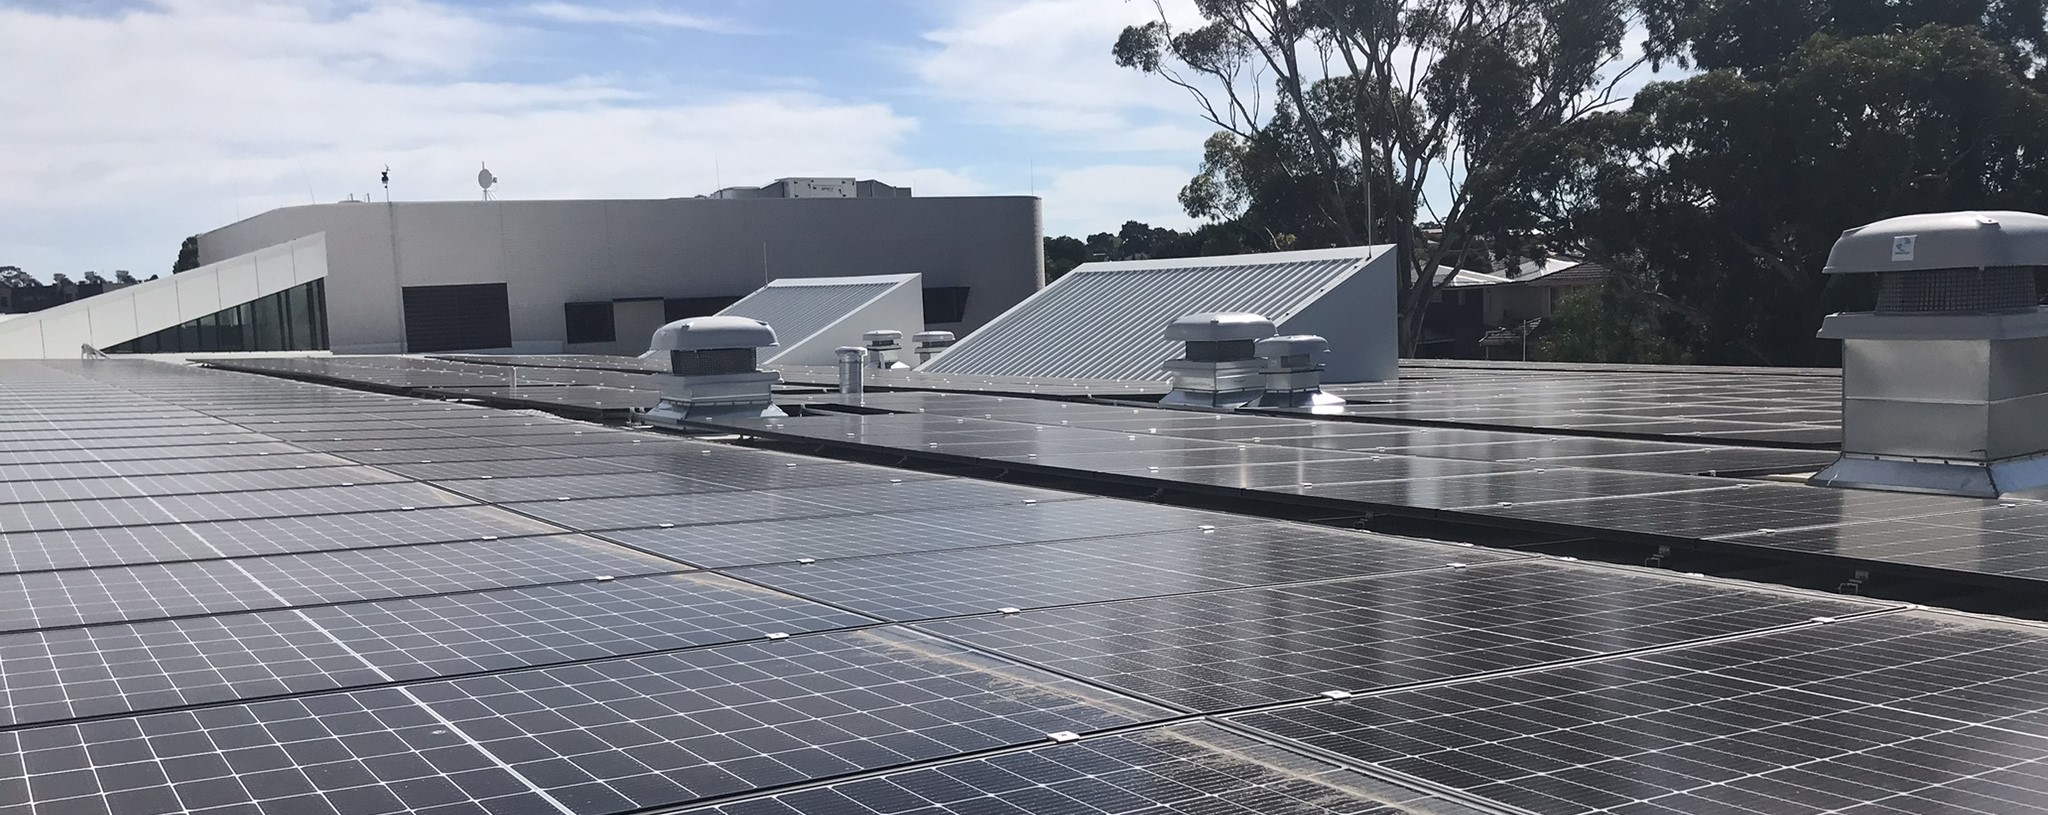 solar panels on industrial building roof